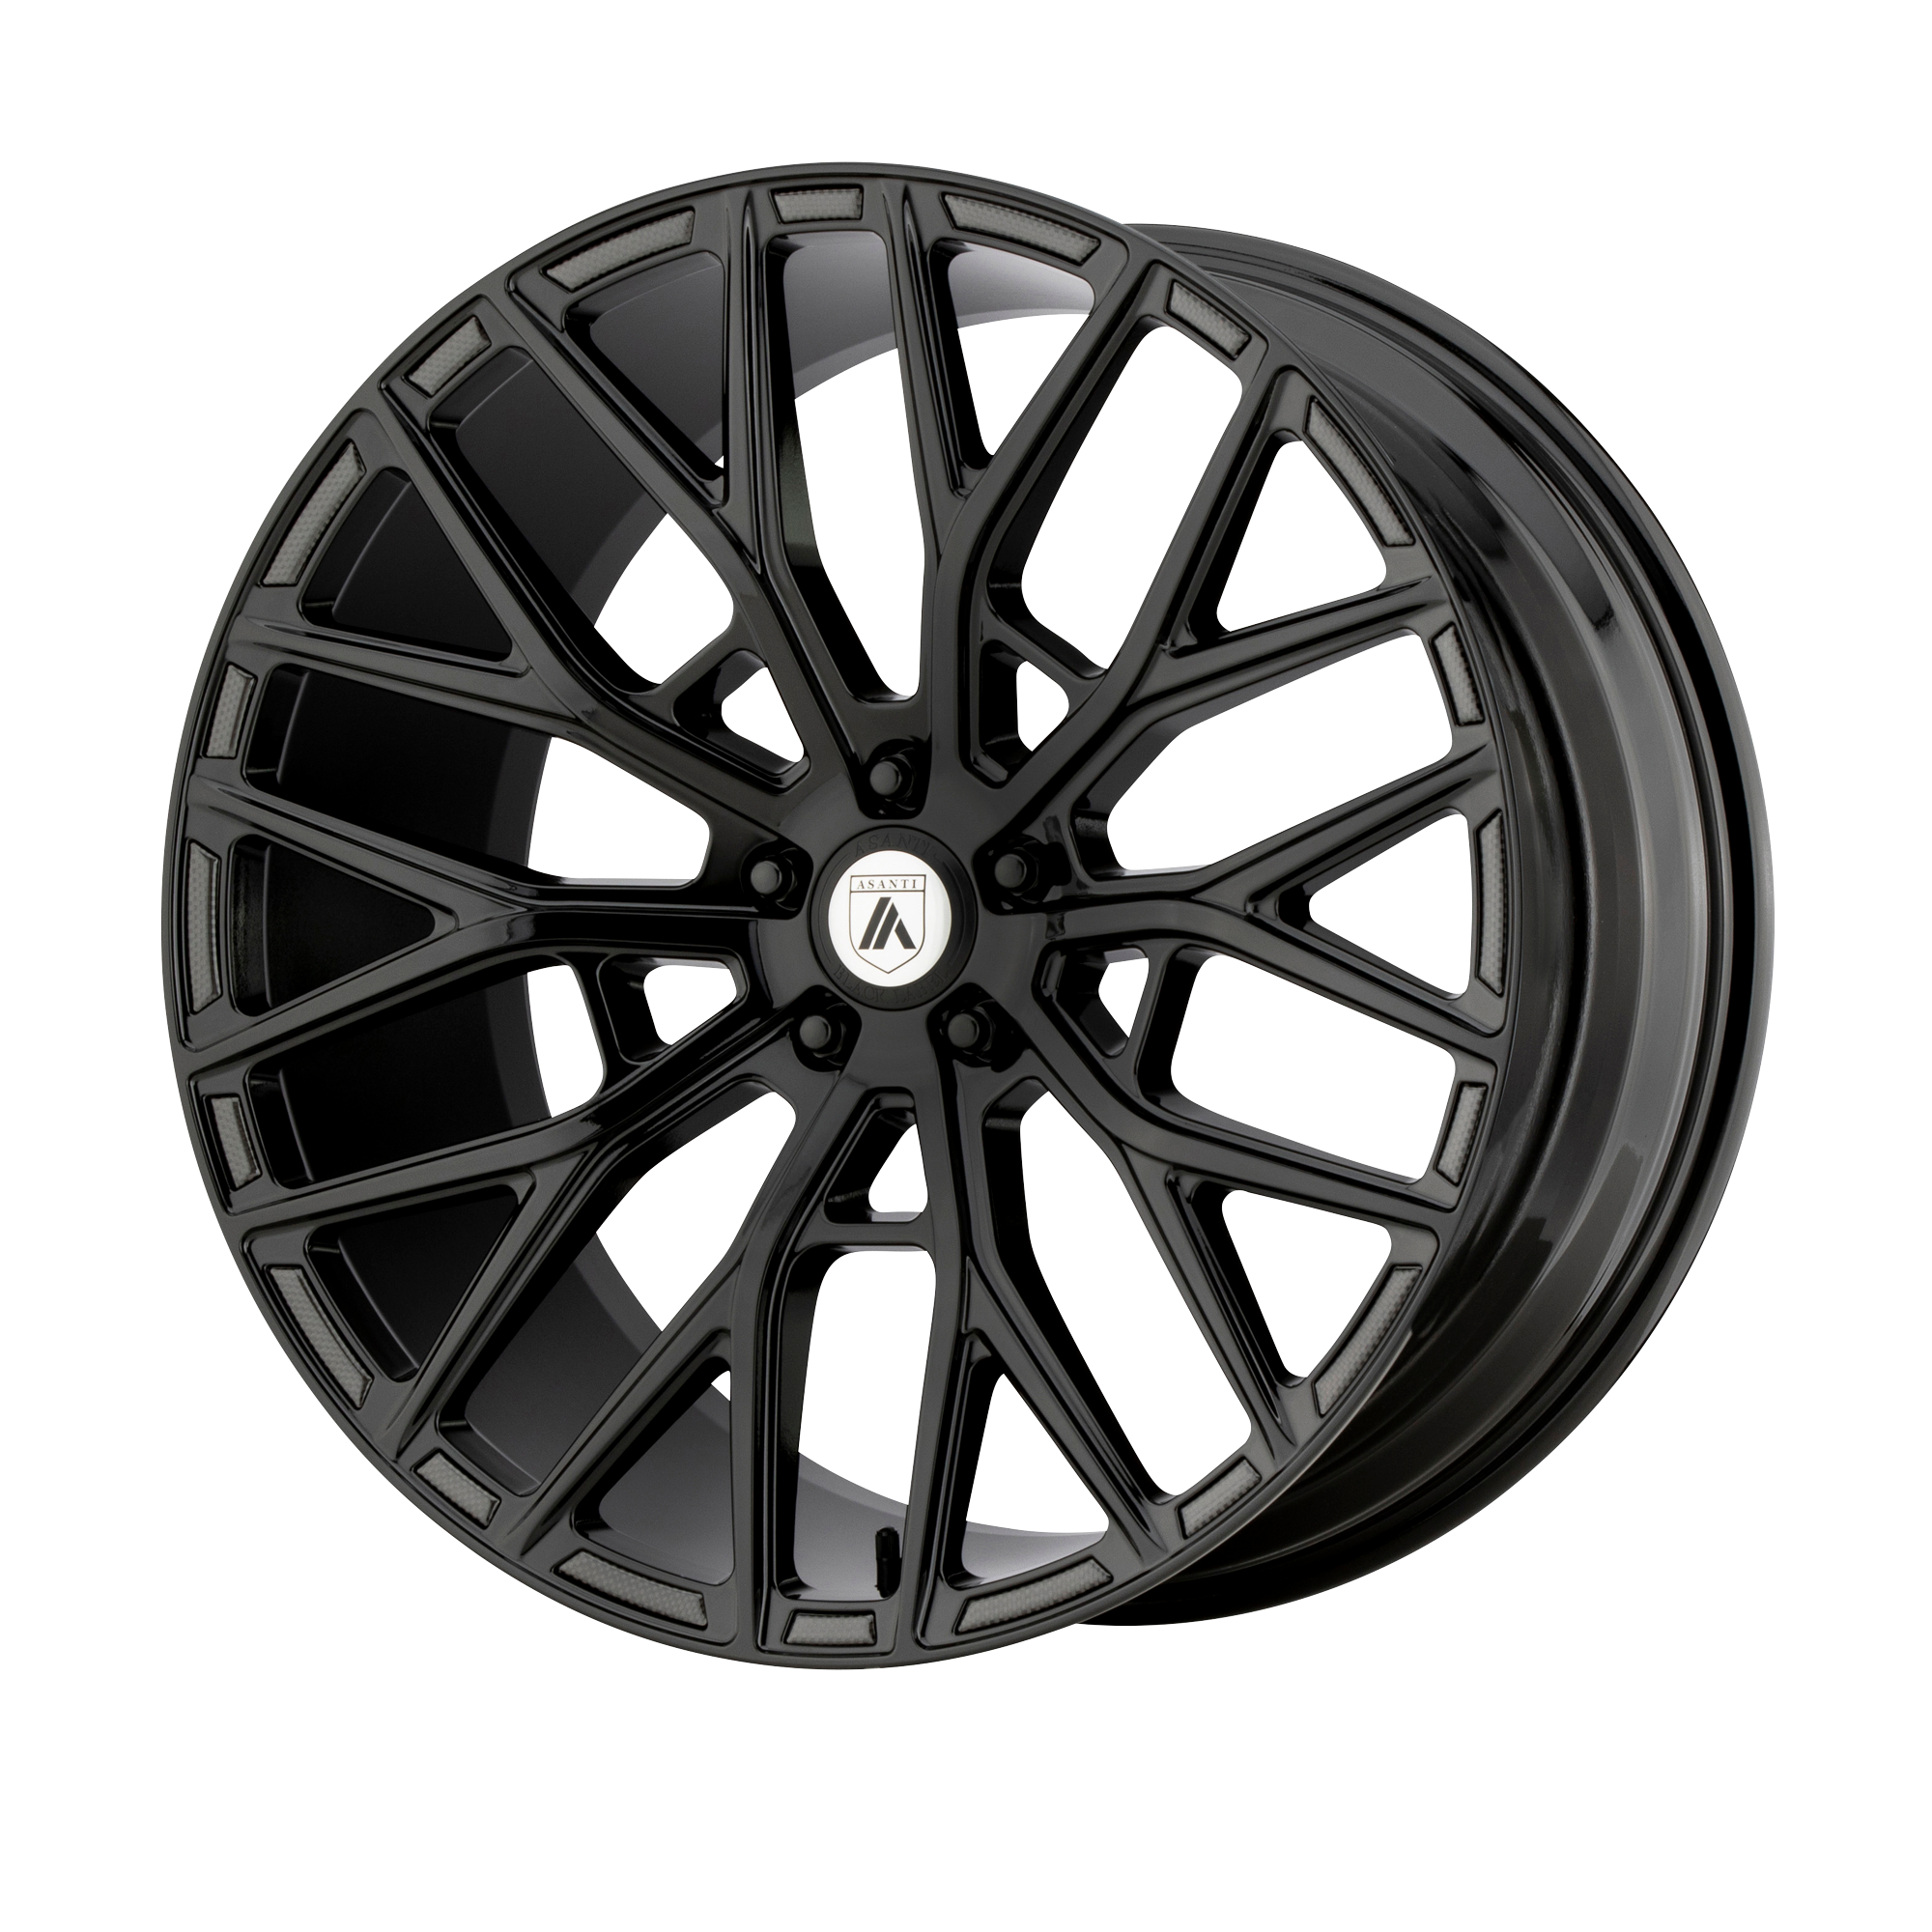 LEO 20x9 Blank GLOSS BLACK (15 mm) - Tires and Engine Performance